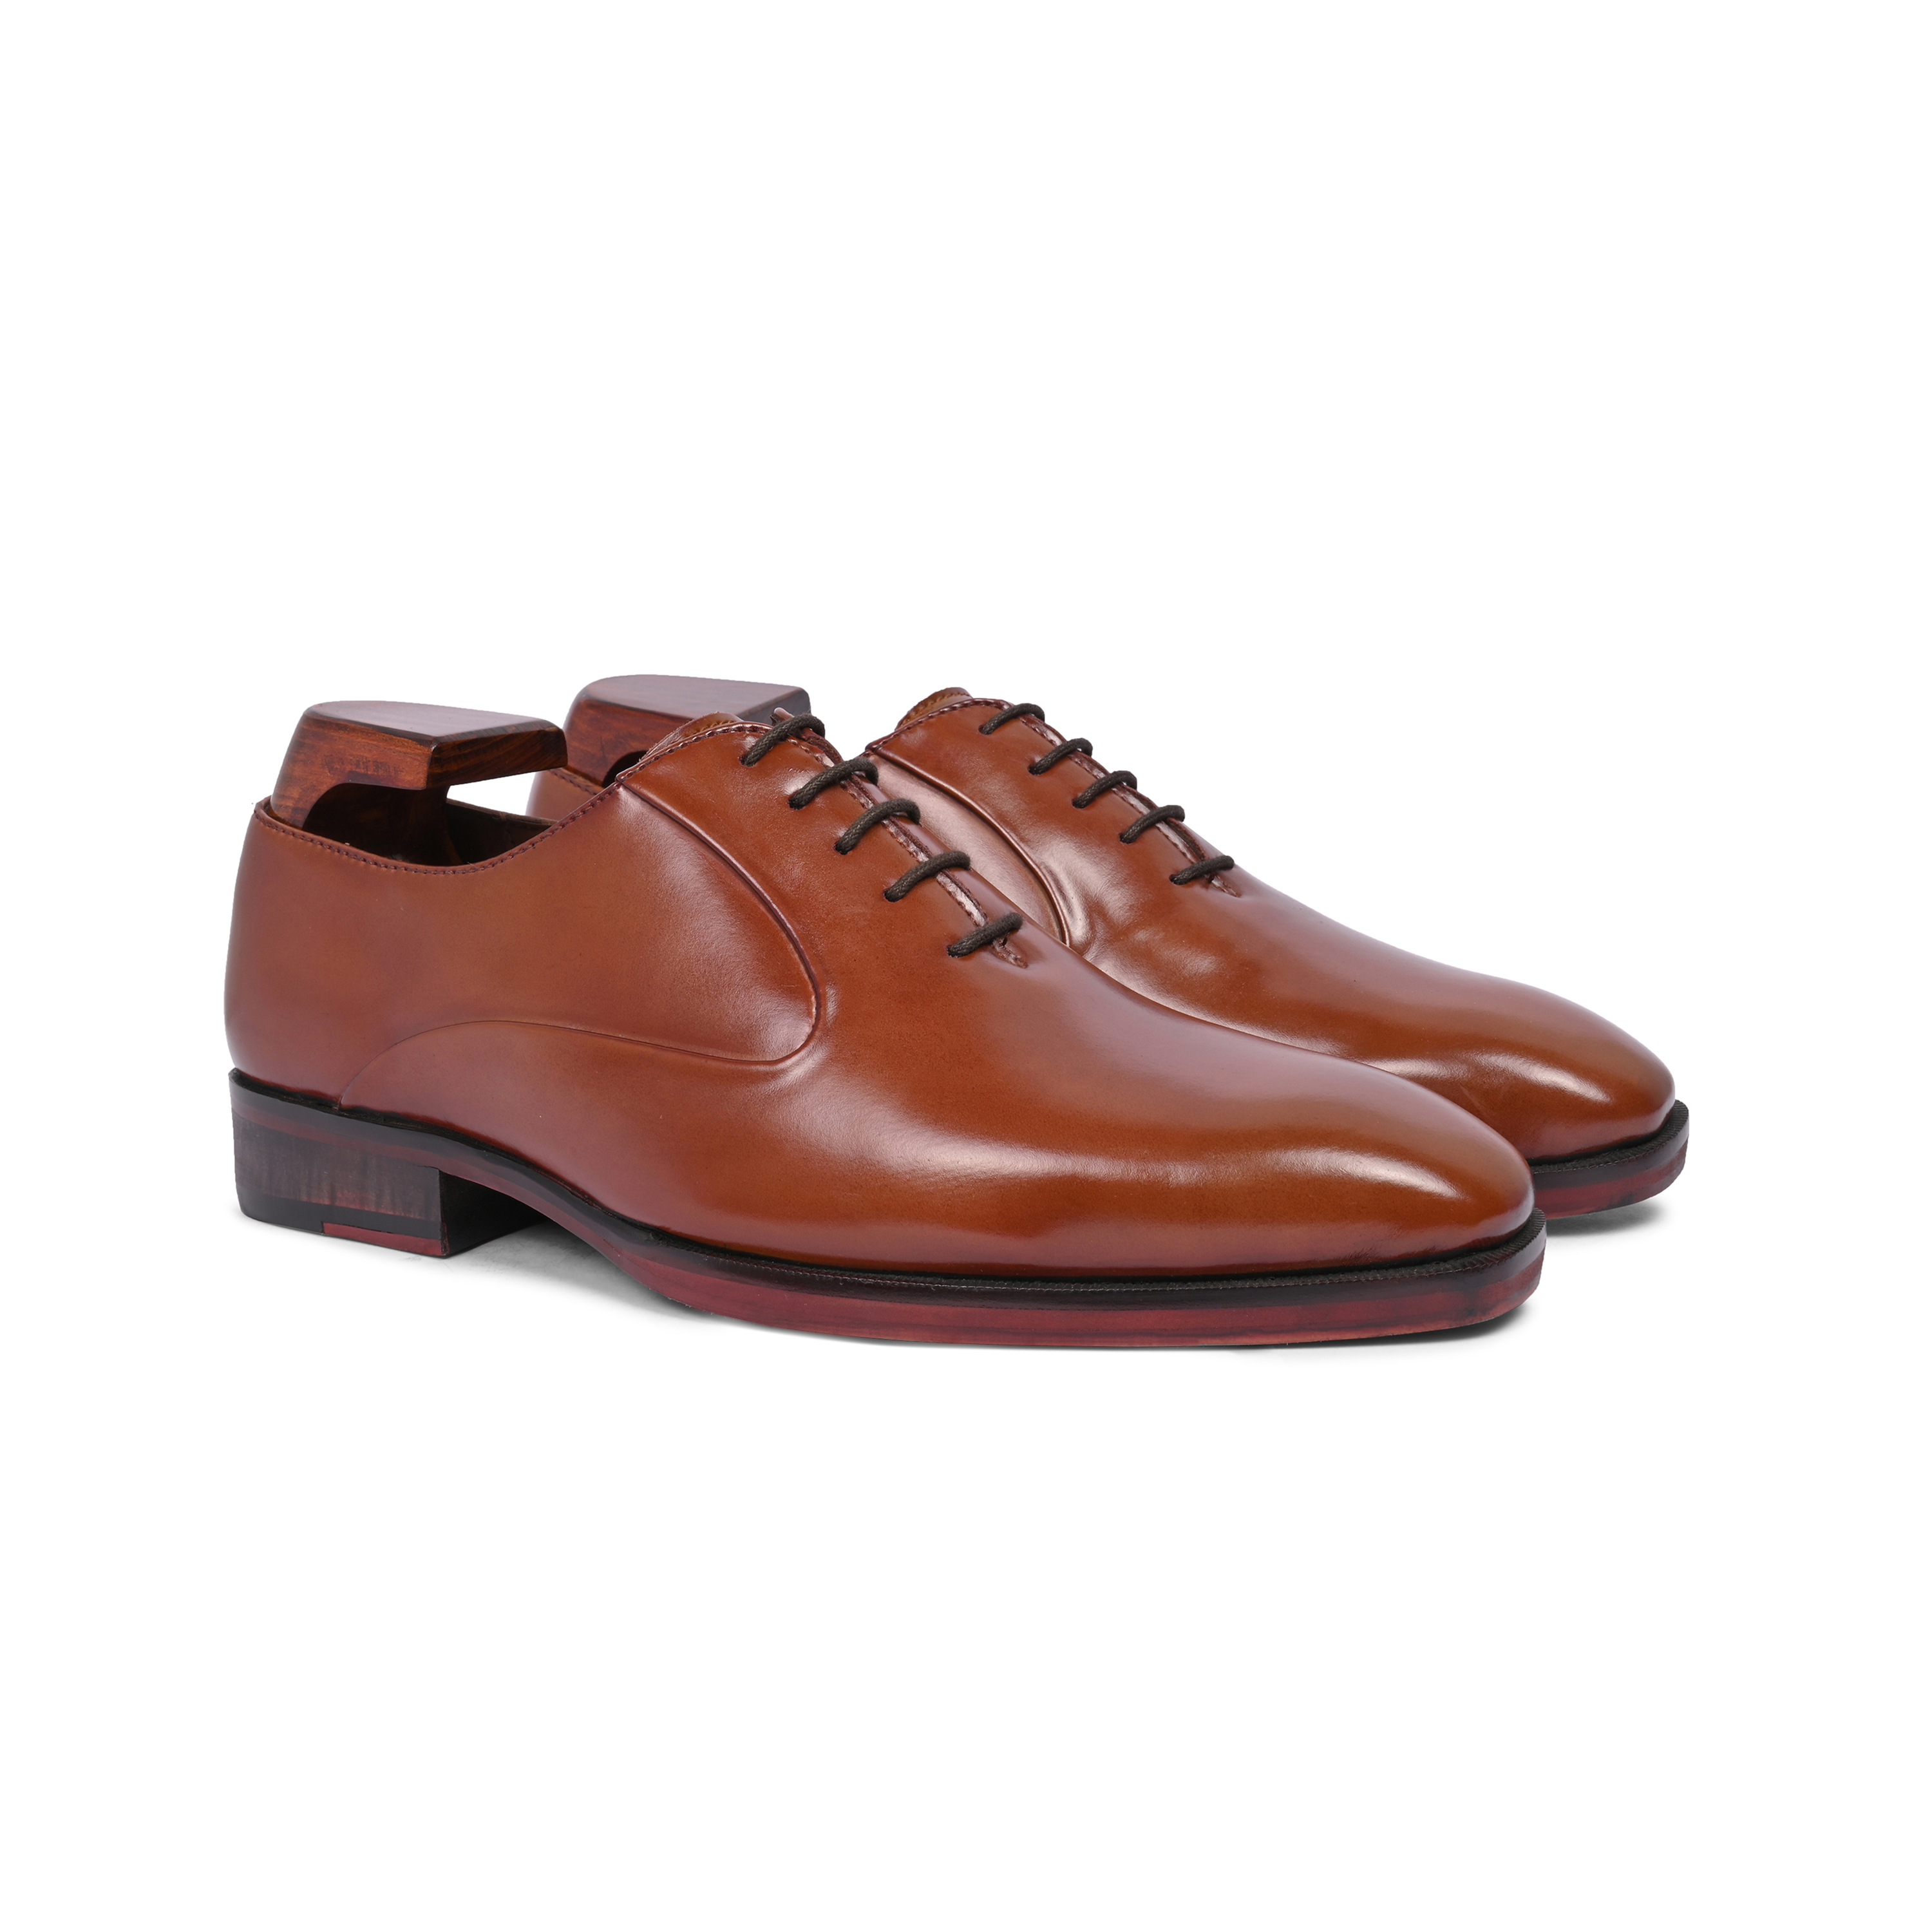 Elysian Eon Derby Formal Lace up Shoes